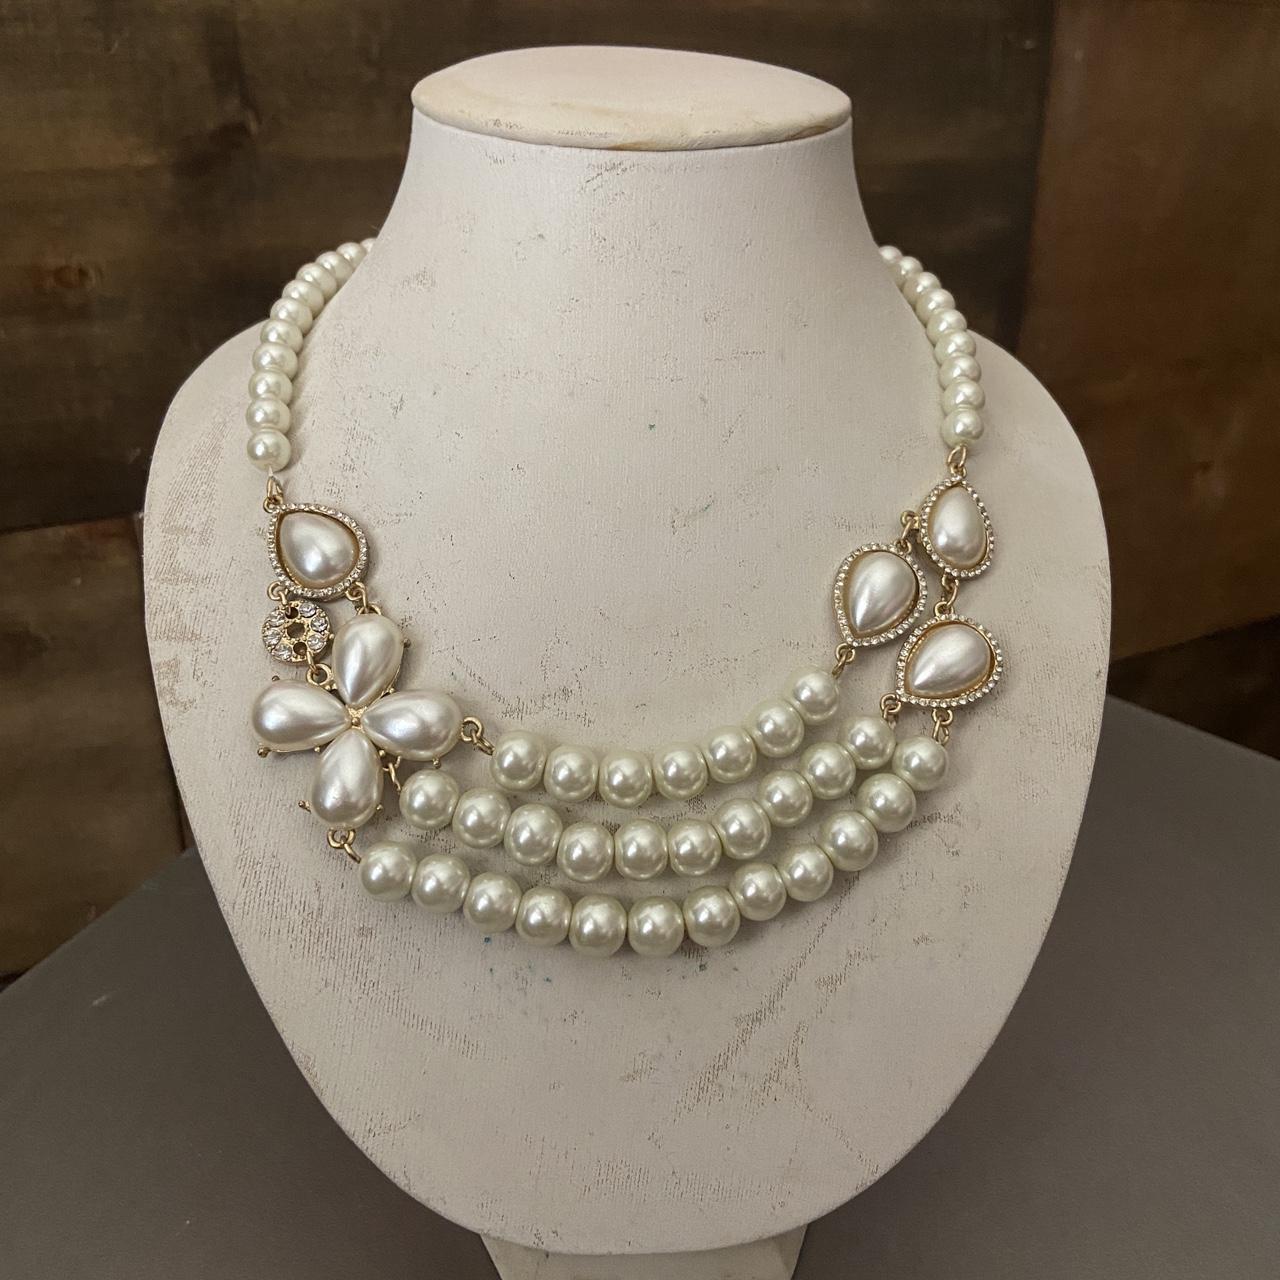 Y2k pearl aesthetic | Girly jewelry, Beaded jewelry, Beaded accessories